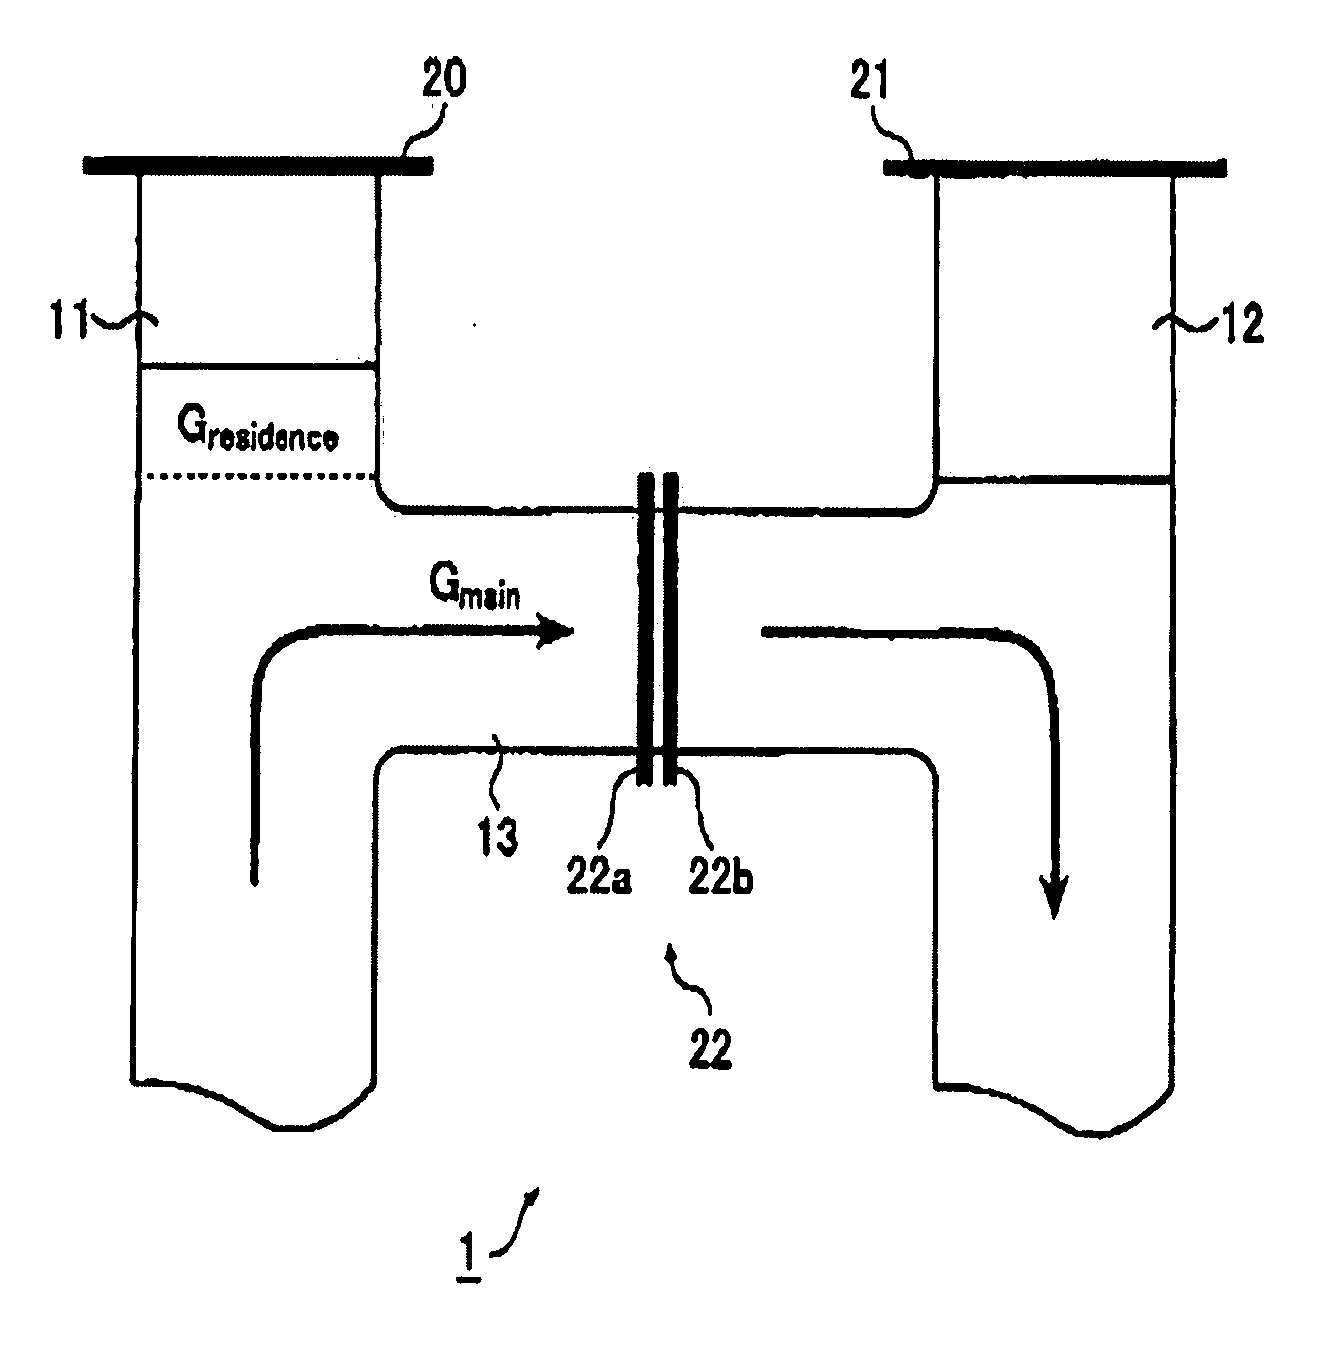 Method for electrically energizing and heating platinum composite tube structure